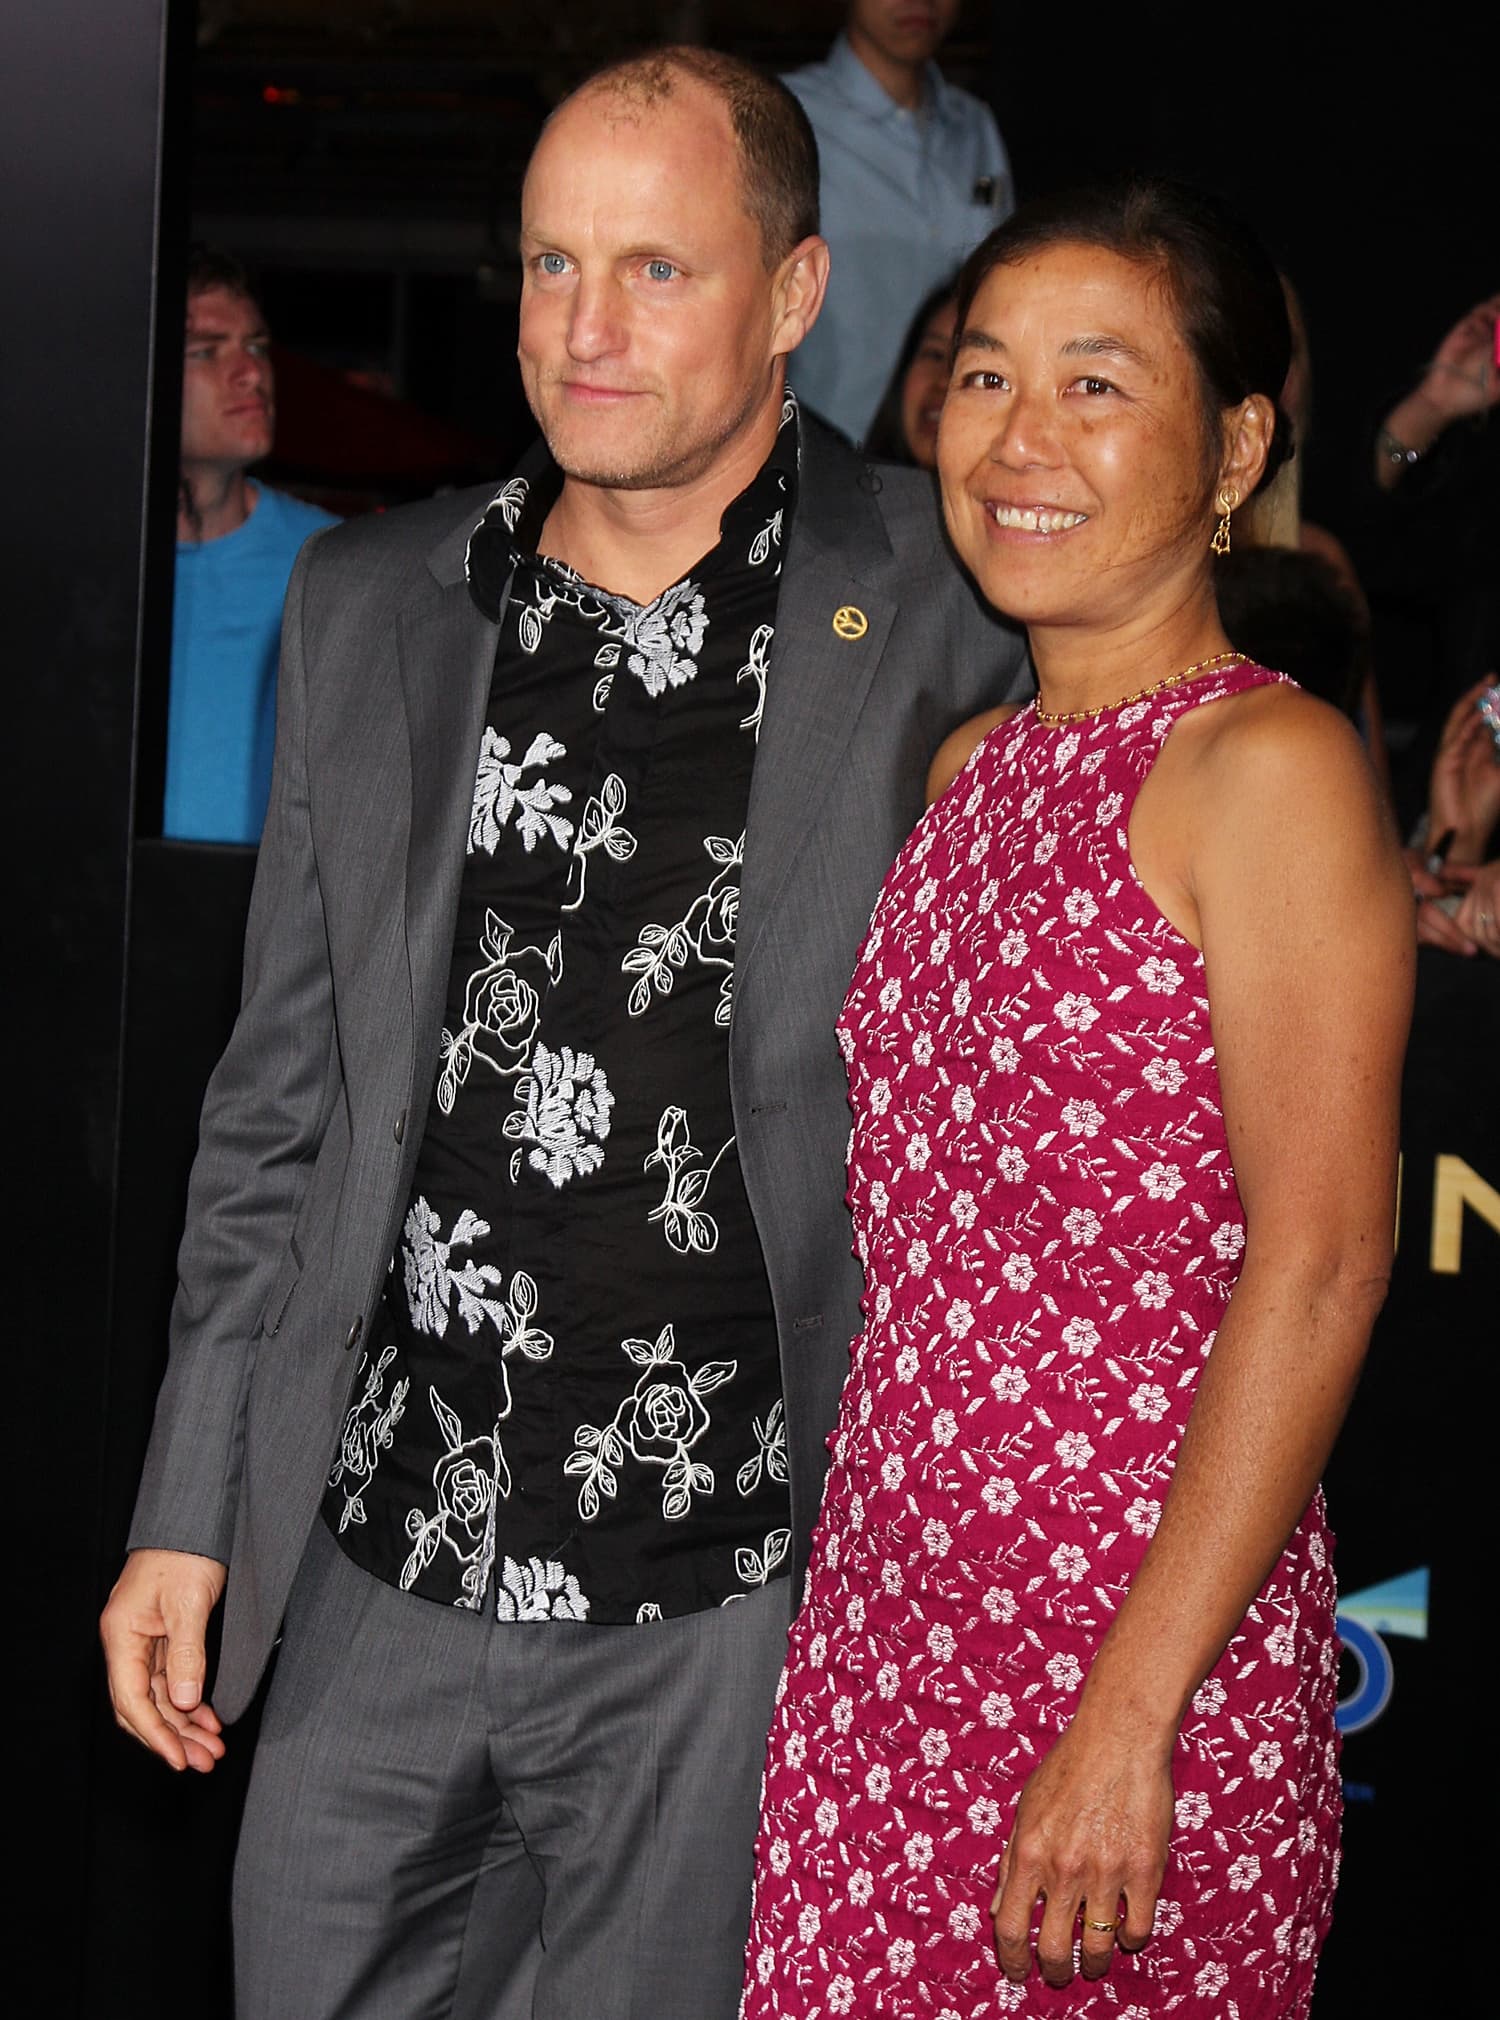 Pictured with his wife Laura Louie, self-proclaimed butthole Woody Harrelson says he did his best to make Jennifer Lawrence laugh while filming Hunger Games